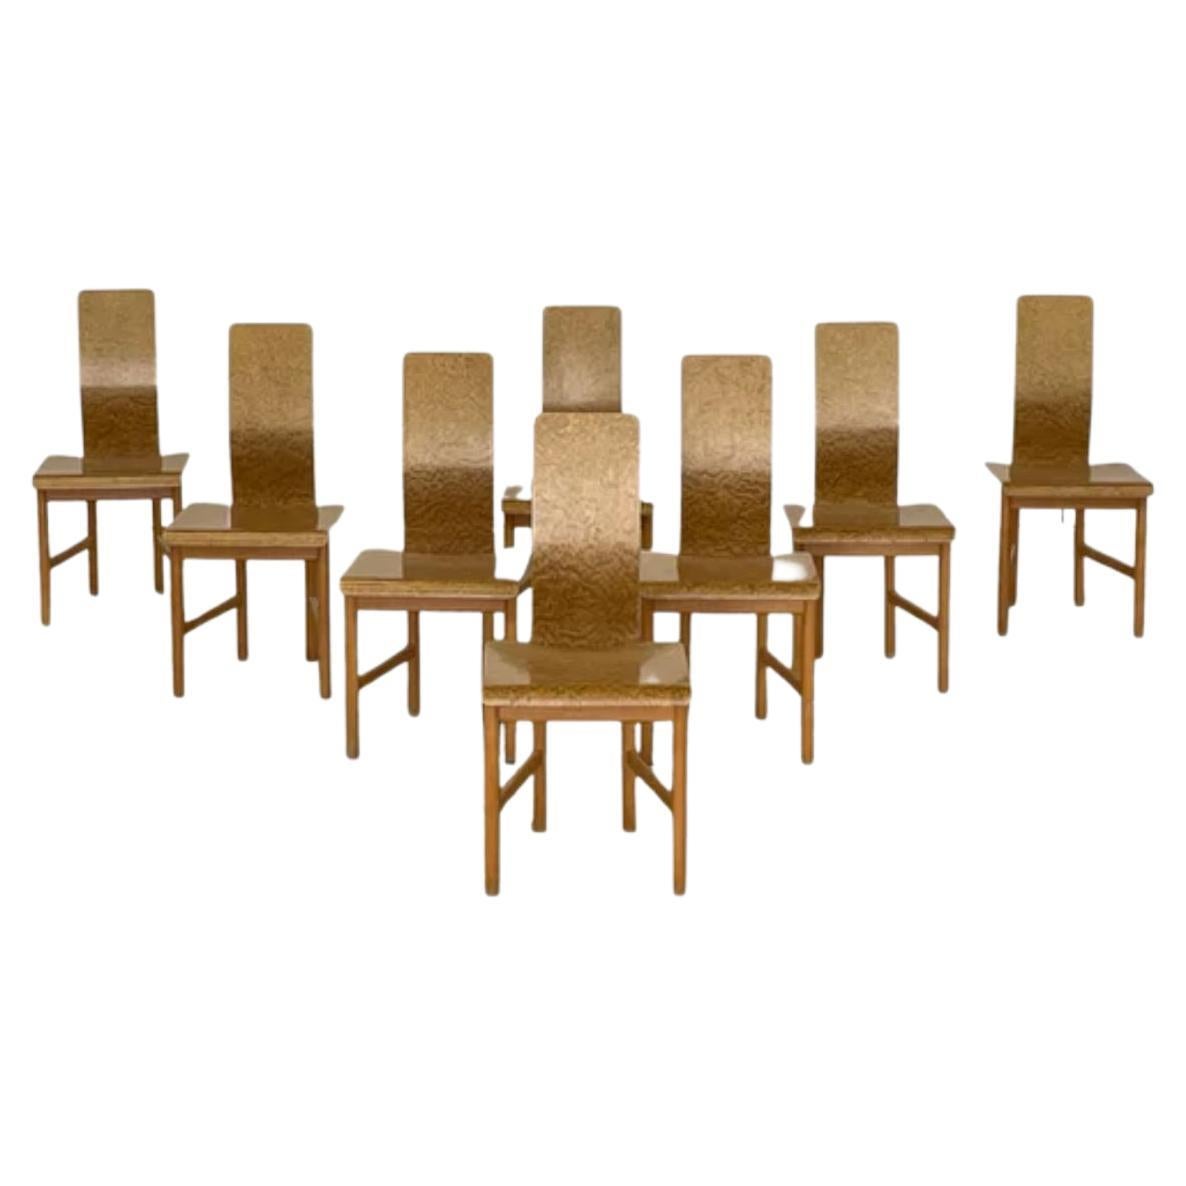 Set of 8 “Vela” Dining Chairs in Burlwood by Enzo Mari, Driade, Italy, 1977